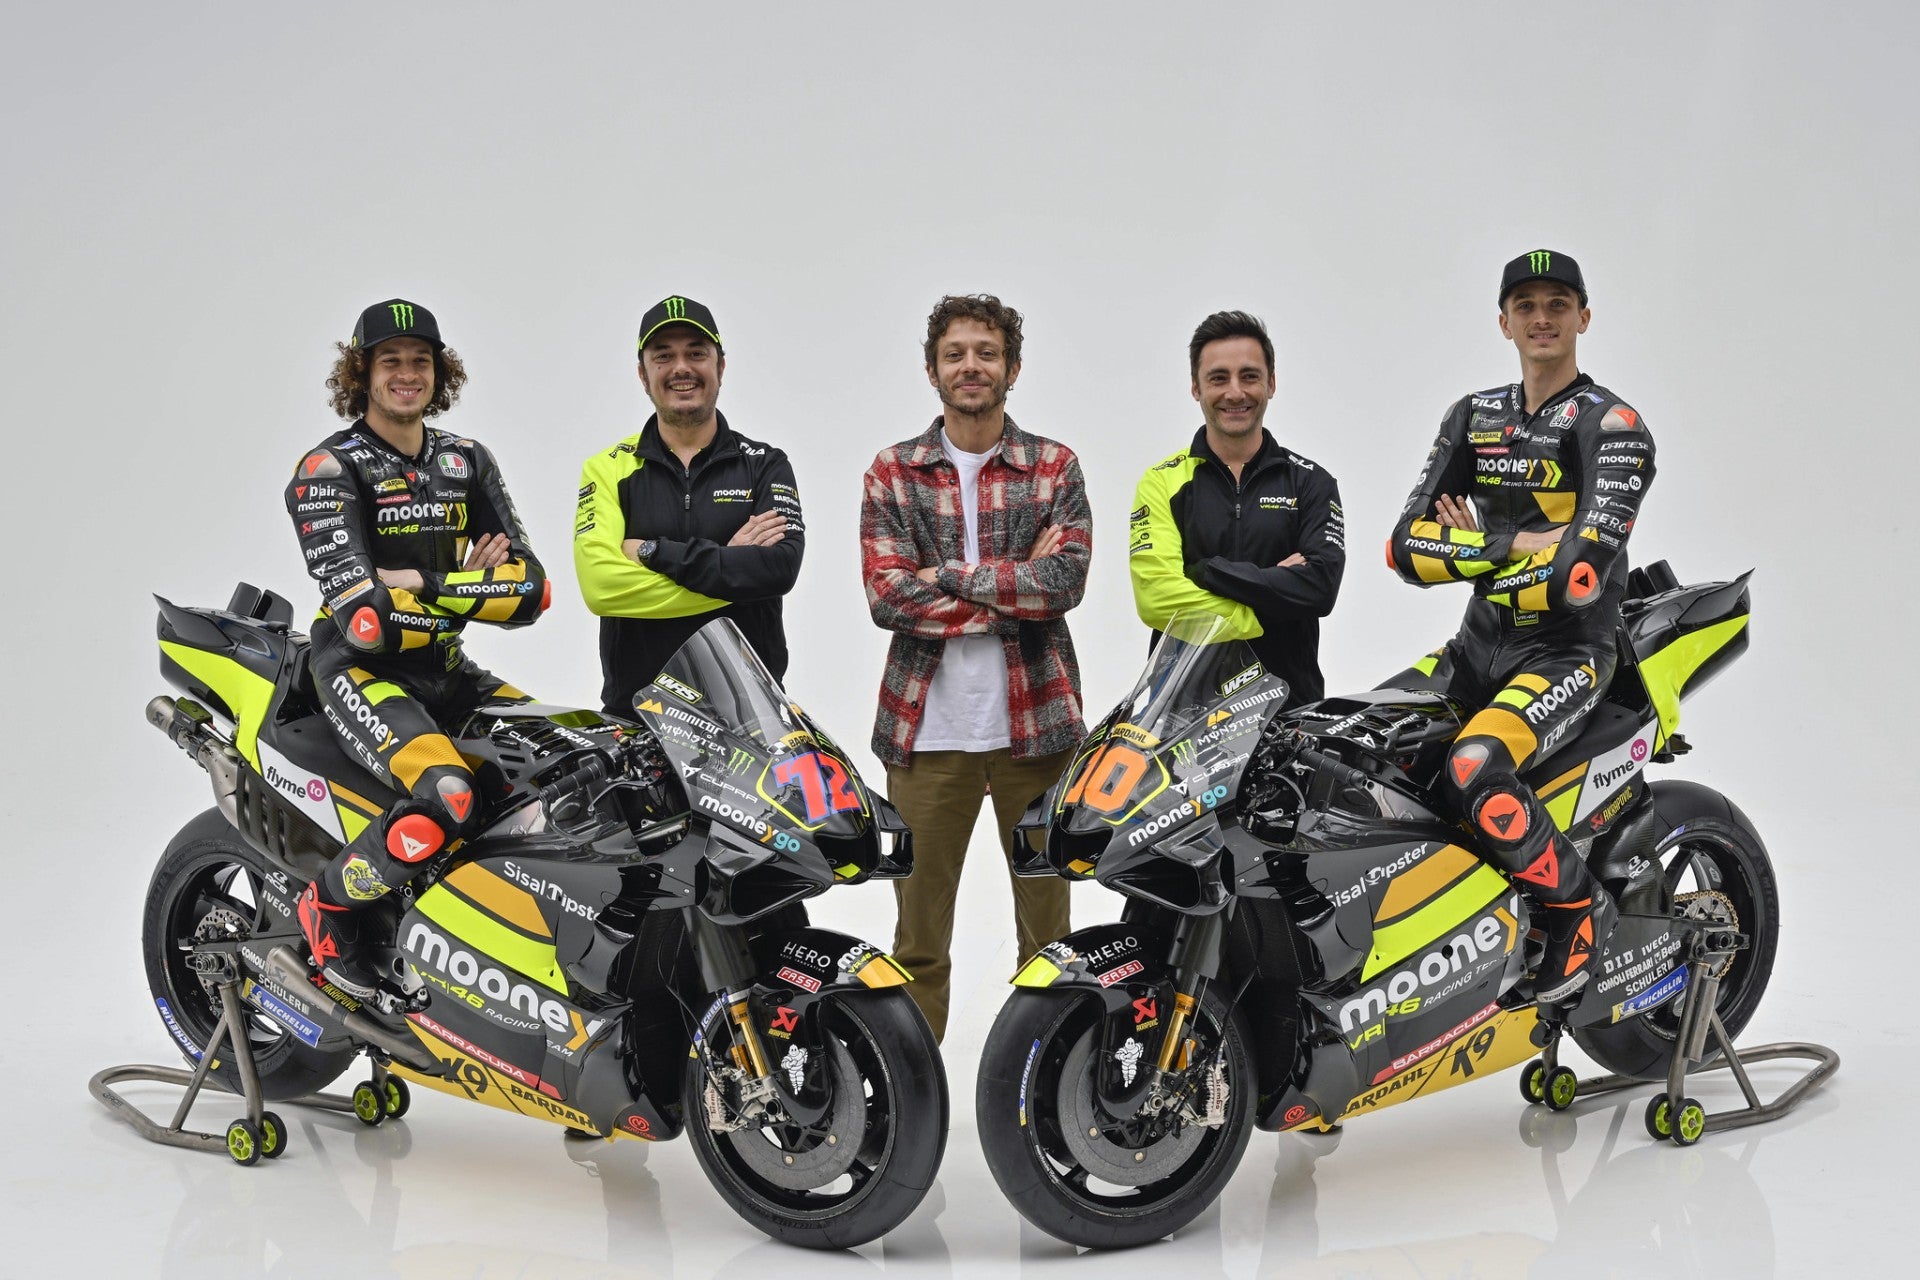 The official VR46 Racing Team colours for this year